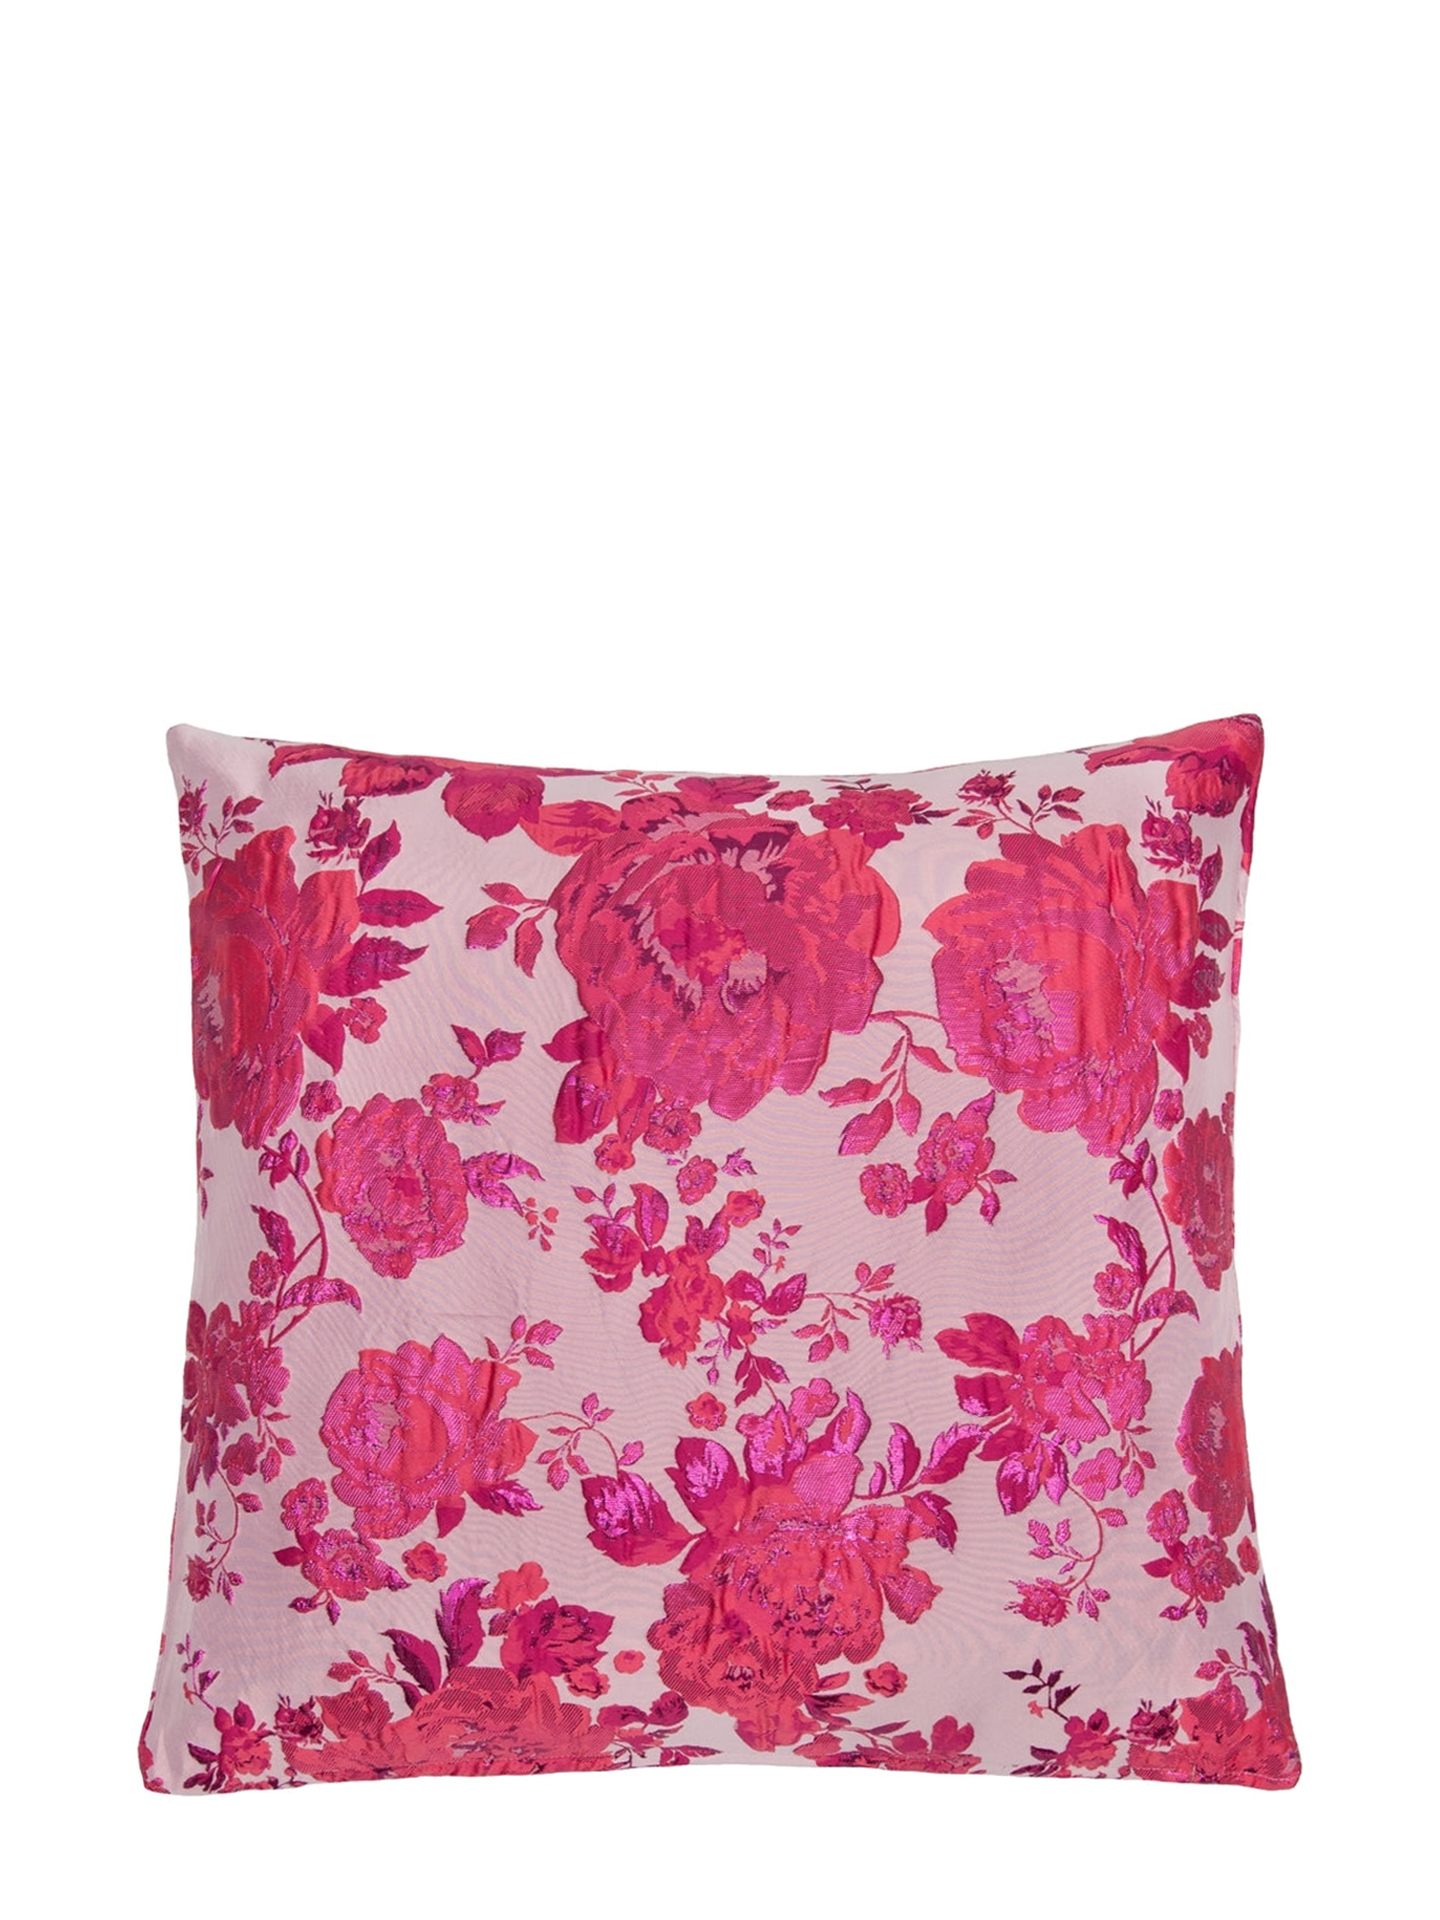 Hot pinks floral cushion